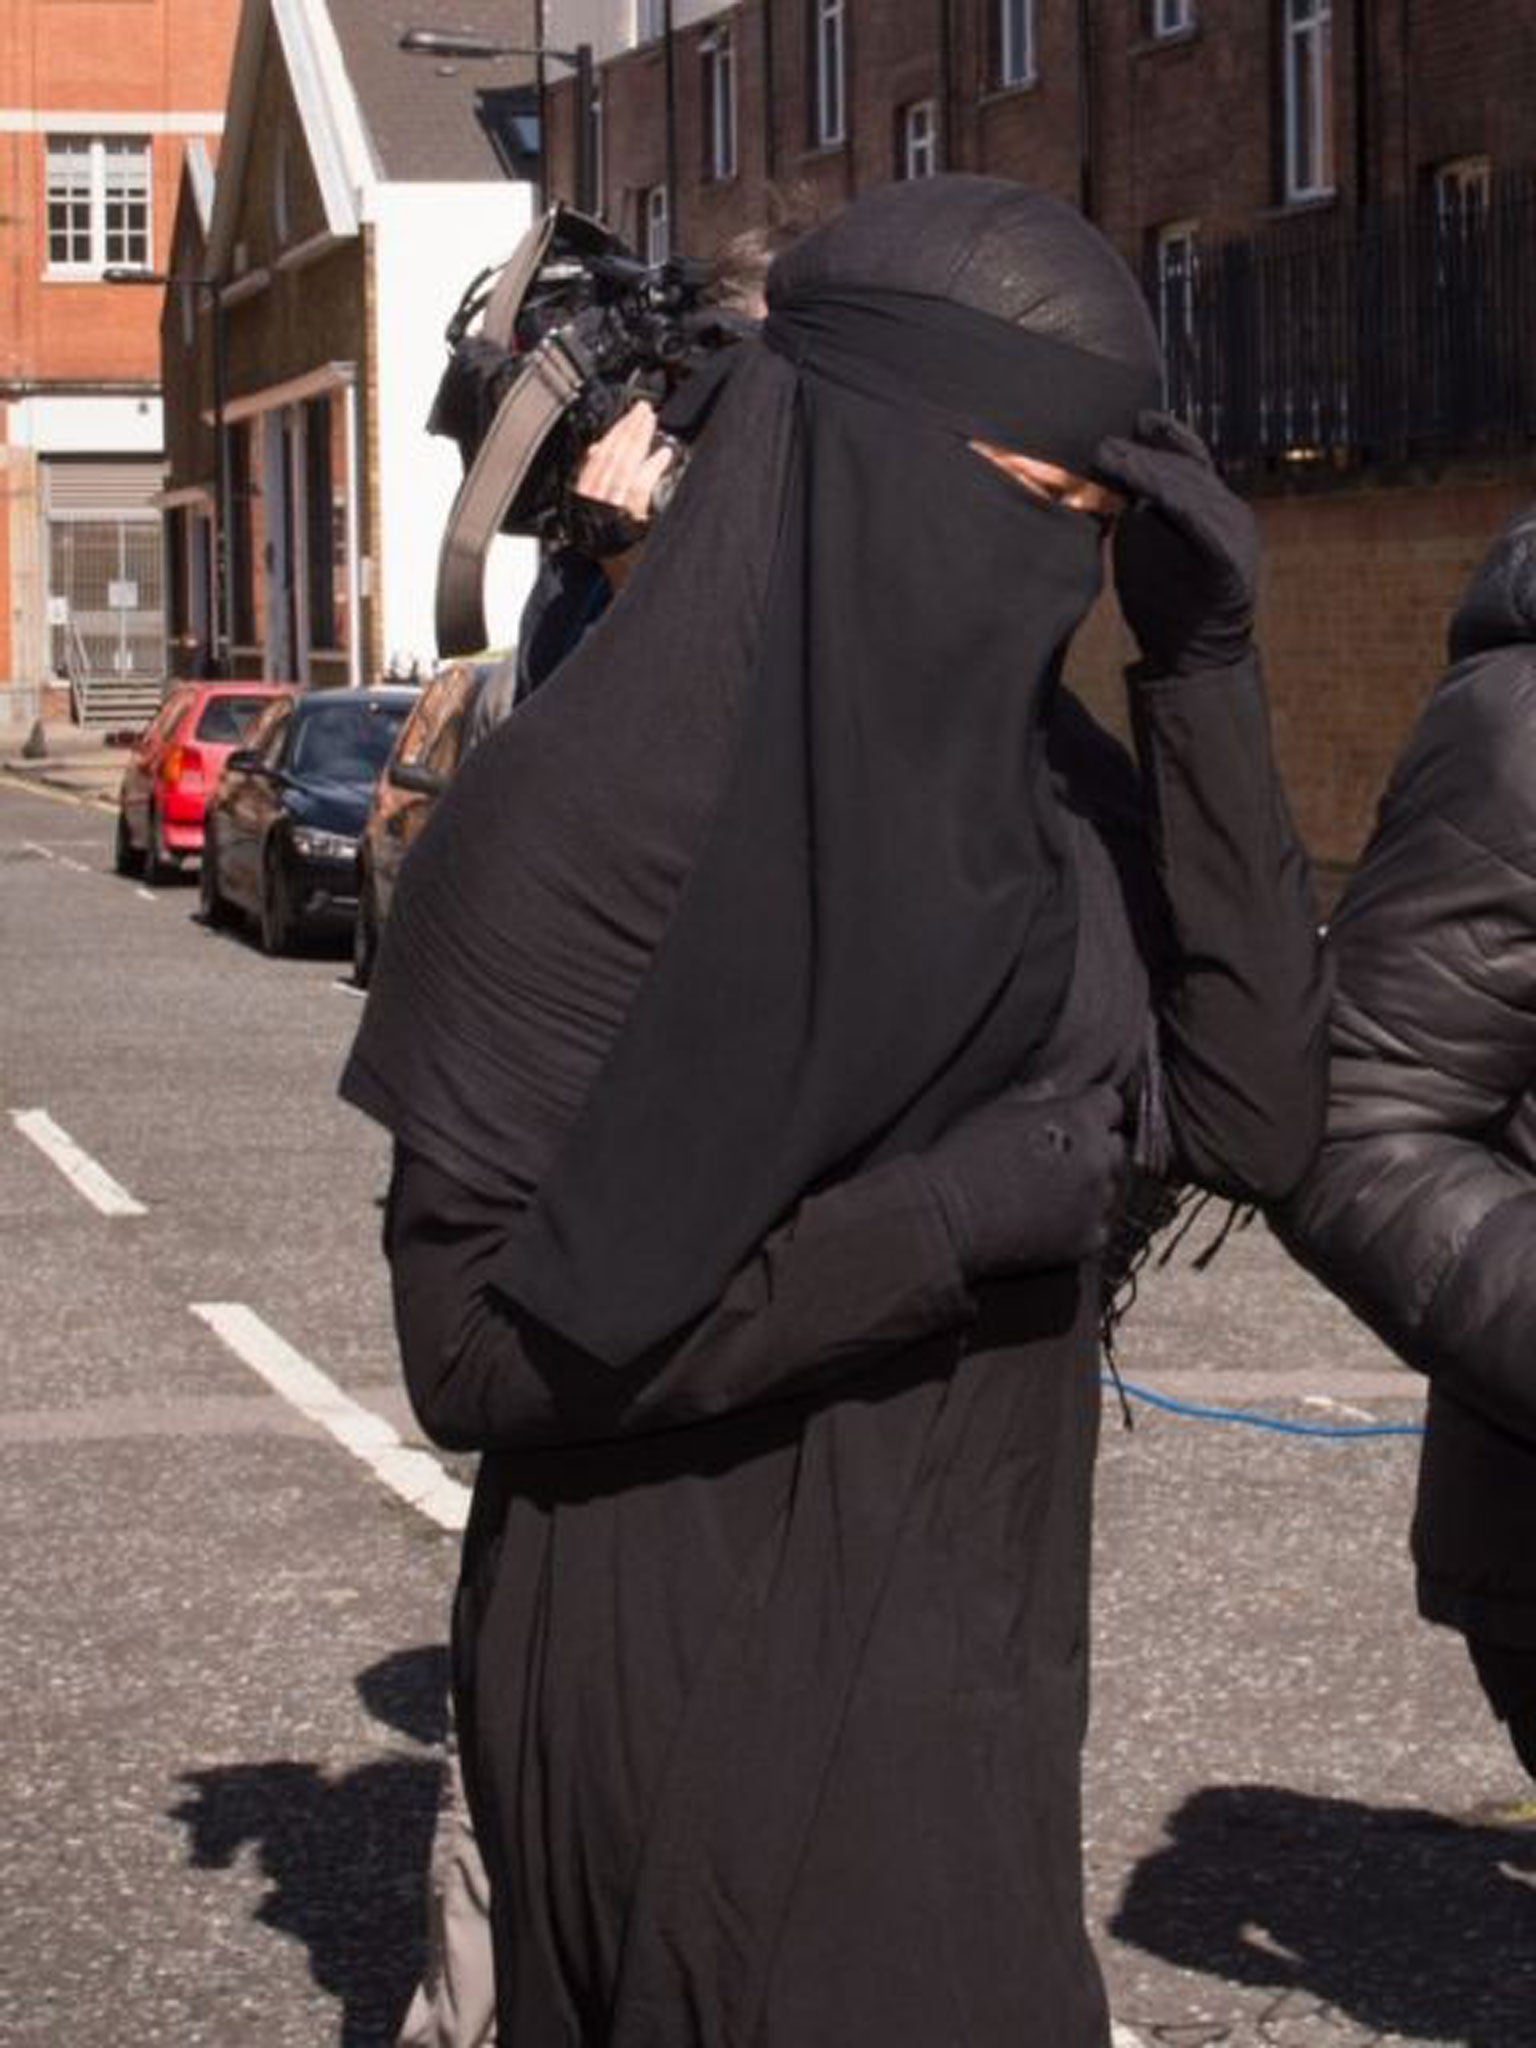 Wearing Niqab Should Be Womans Choice Says Theresa May The Independent